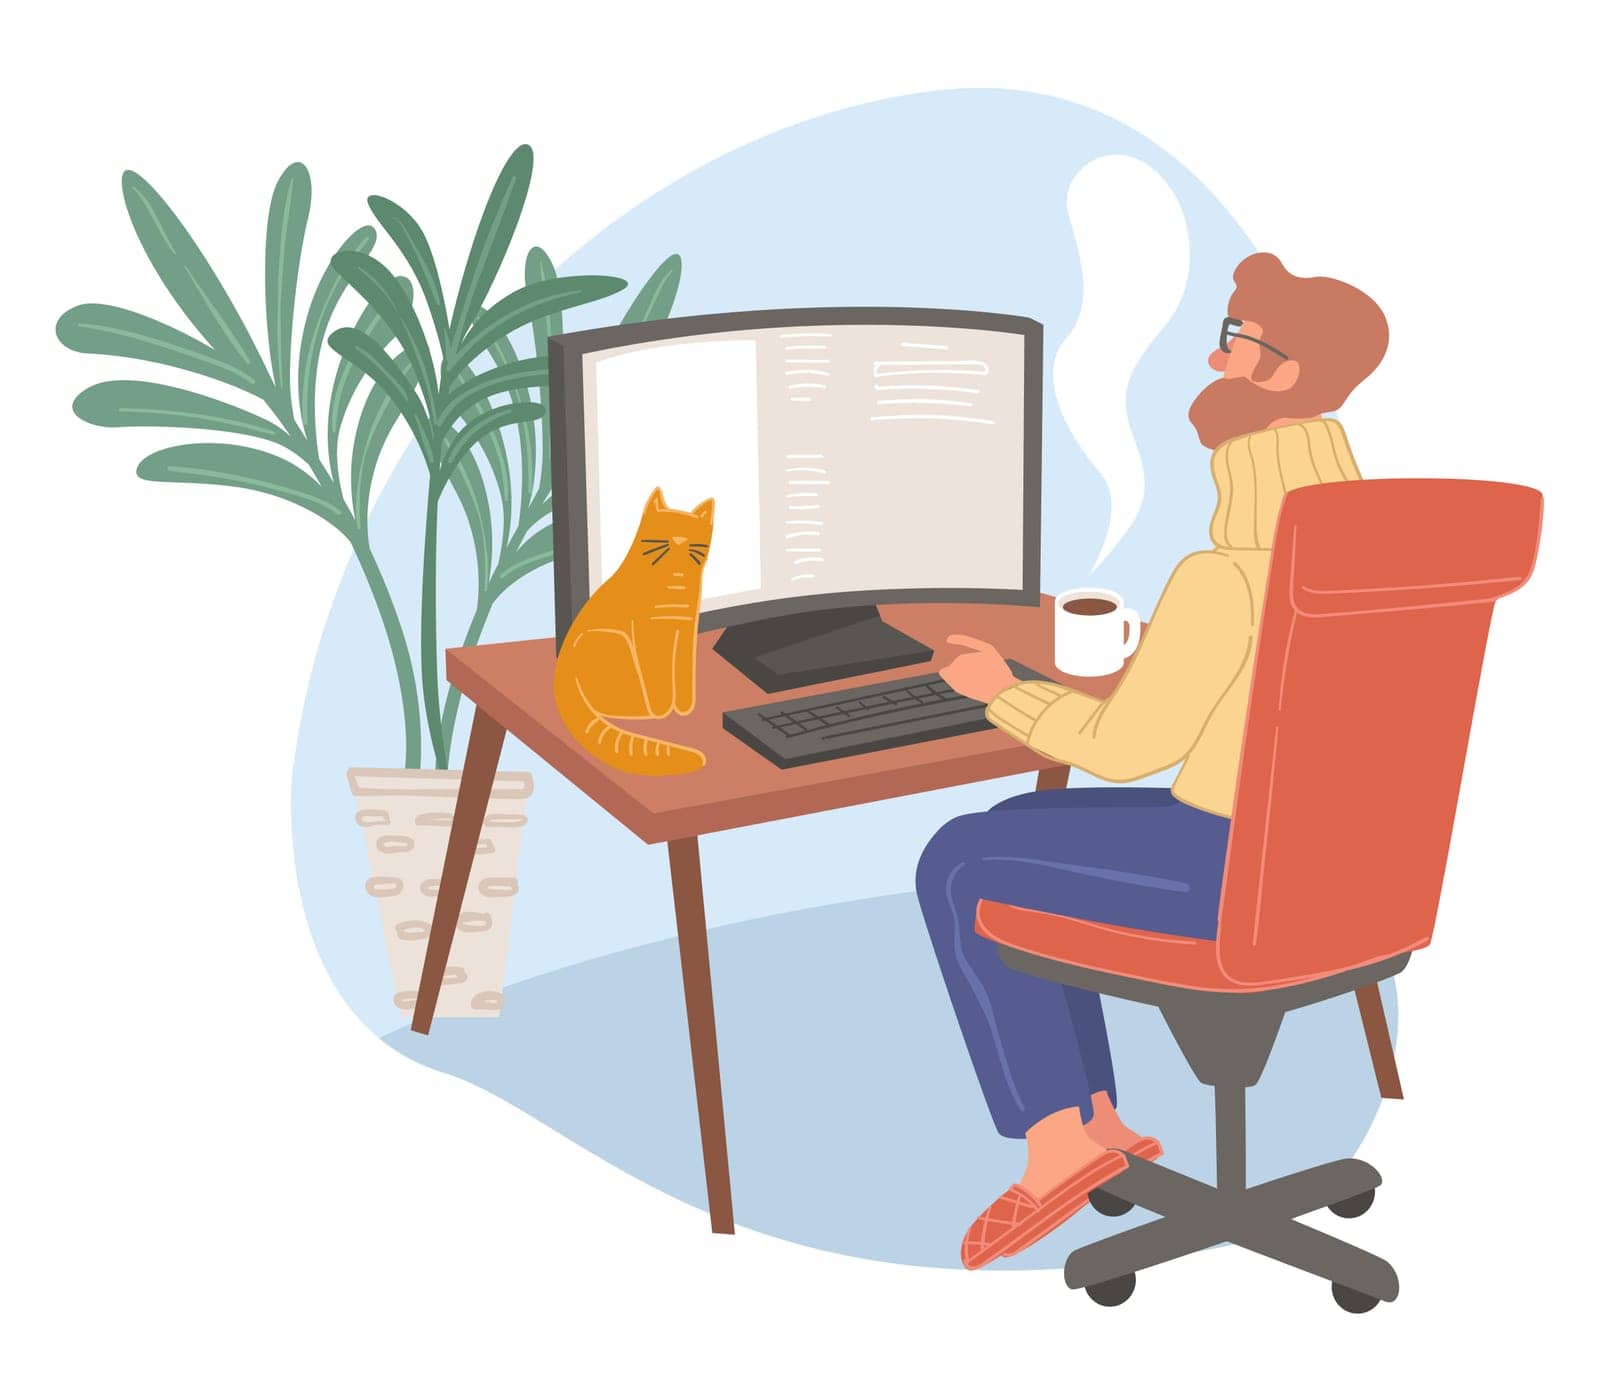 Male character working from home as freelancer using personal computer for tasks and projects completion. Man sitting with cat pet. Worker at workplace during quarantine. Vector in flat style